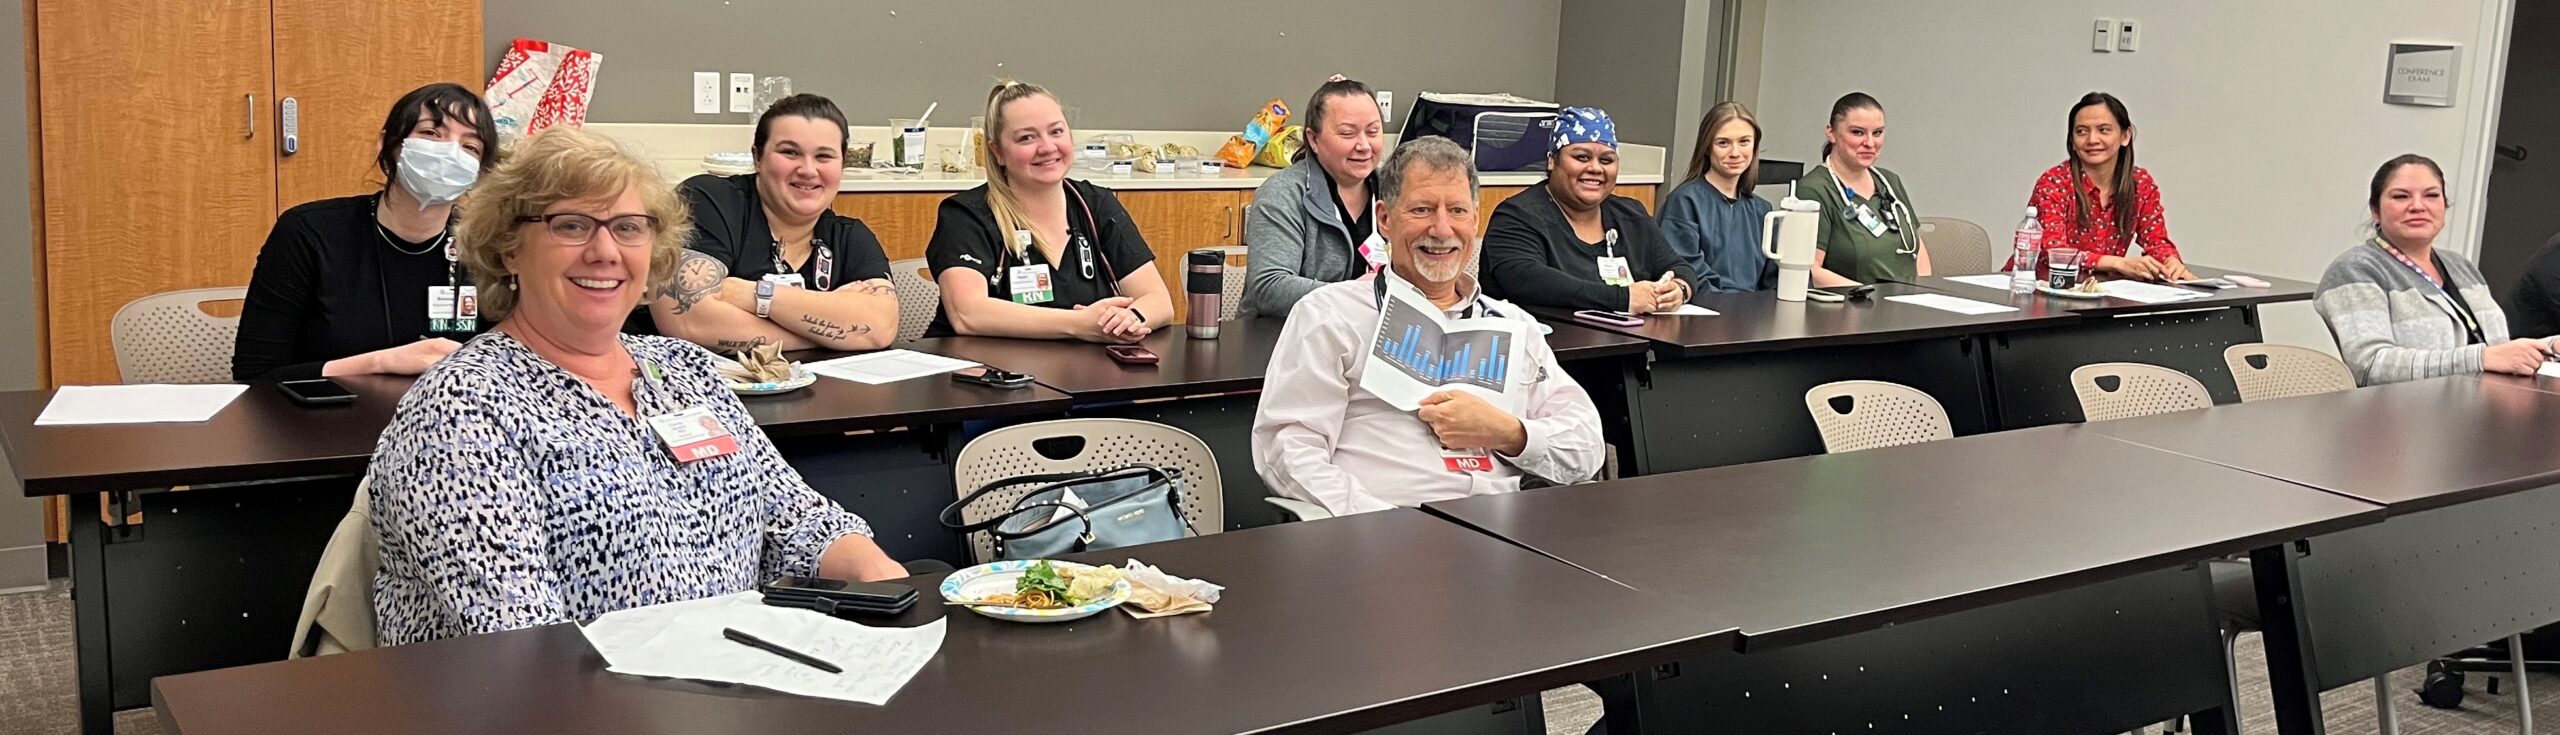 Medical providers with Multicare Health System Spokane participate in MouthMatters Training